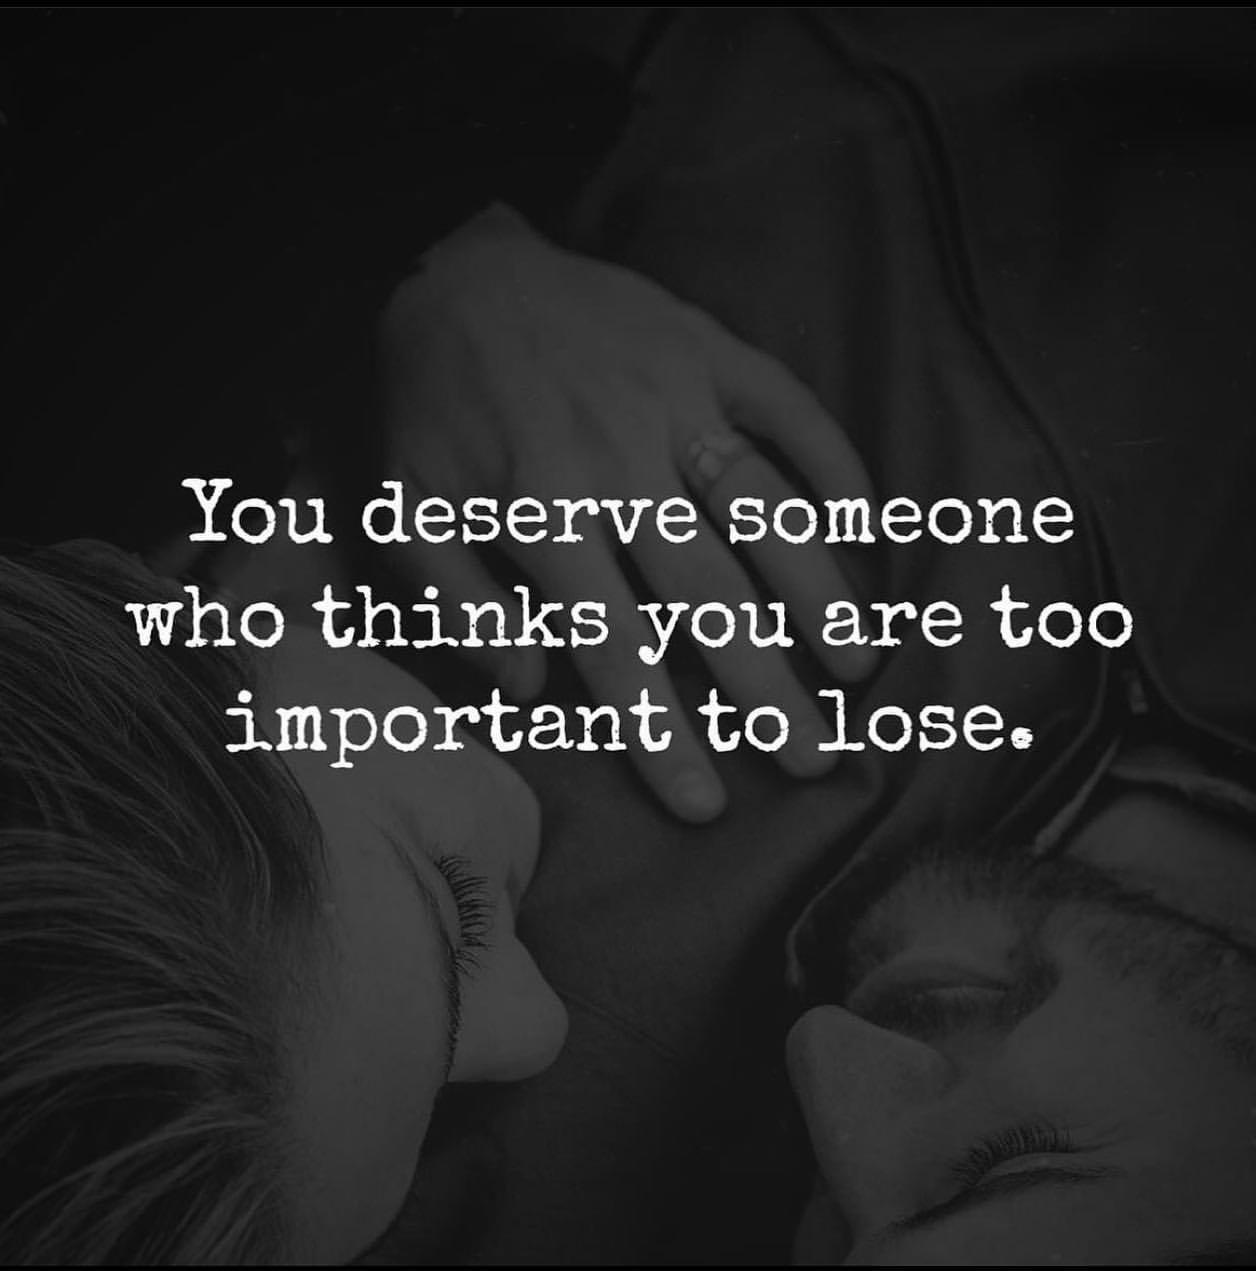 You deserve someone who thinks you are too important to lose.